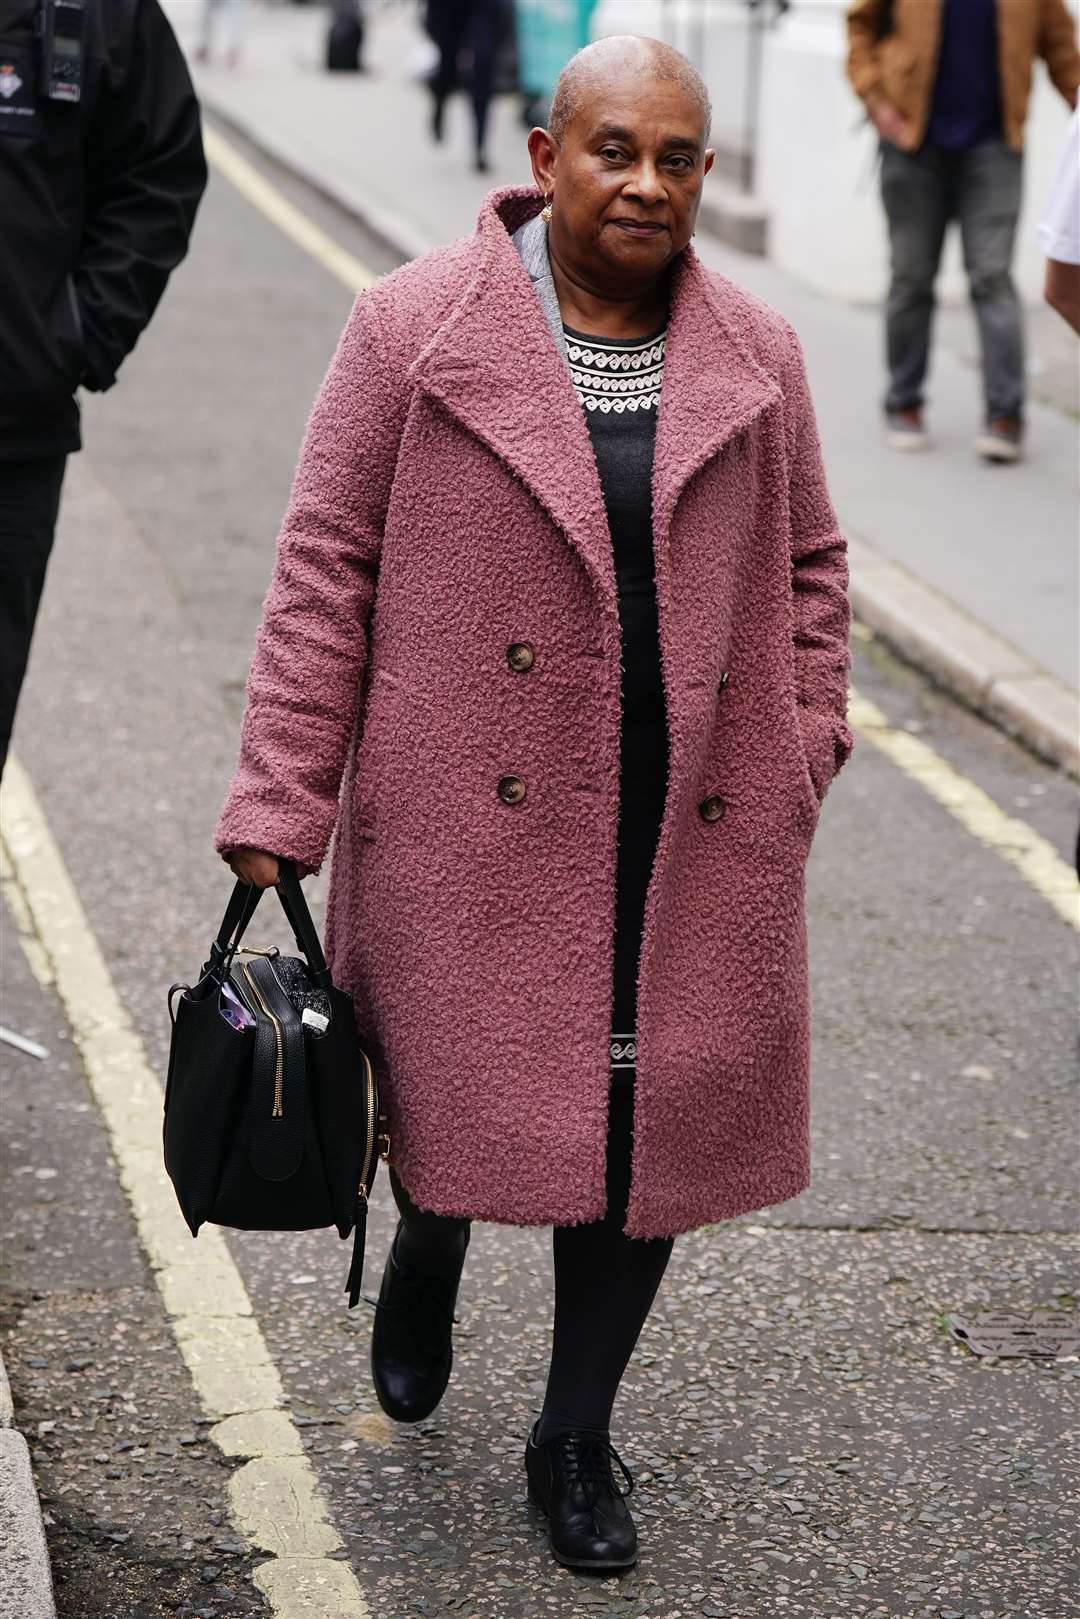 Baroness Doreen Lawrence leaves the Royal Courts Of Justice (Aaron Chown/PA)